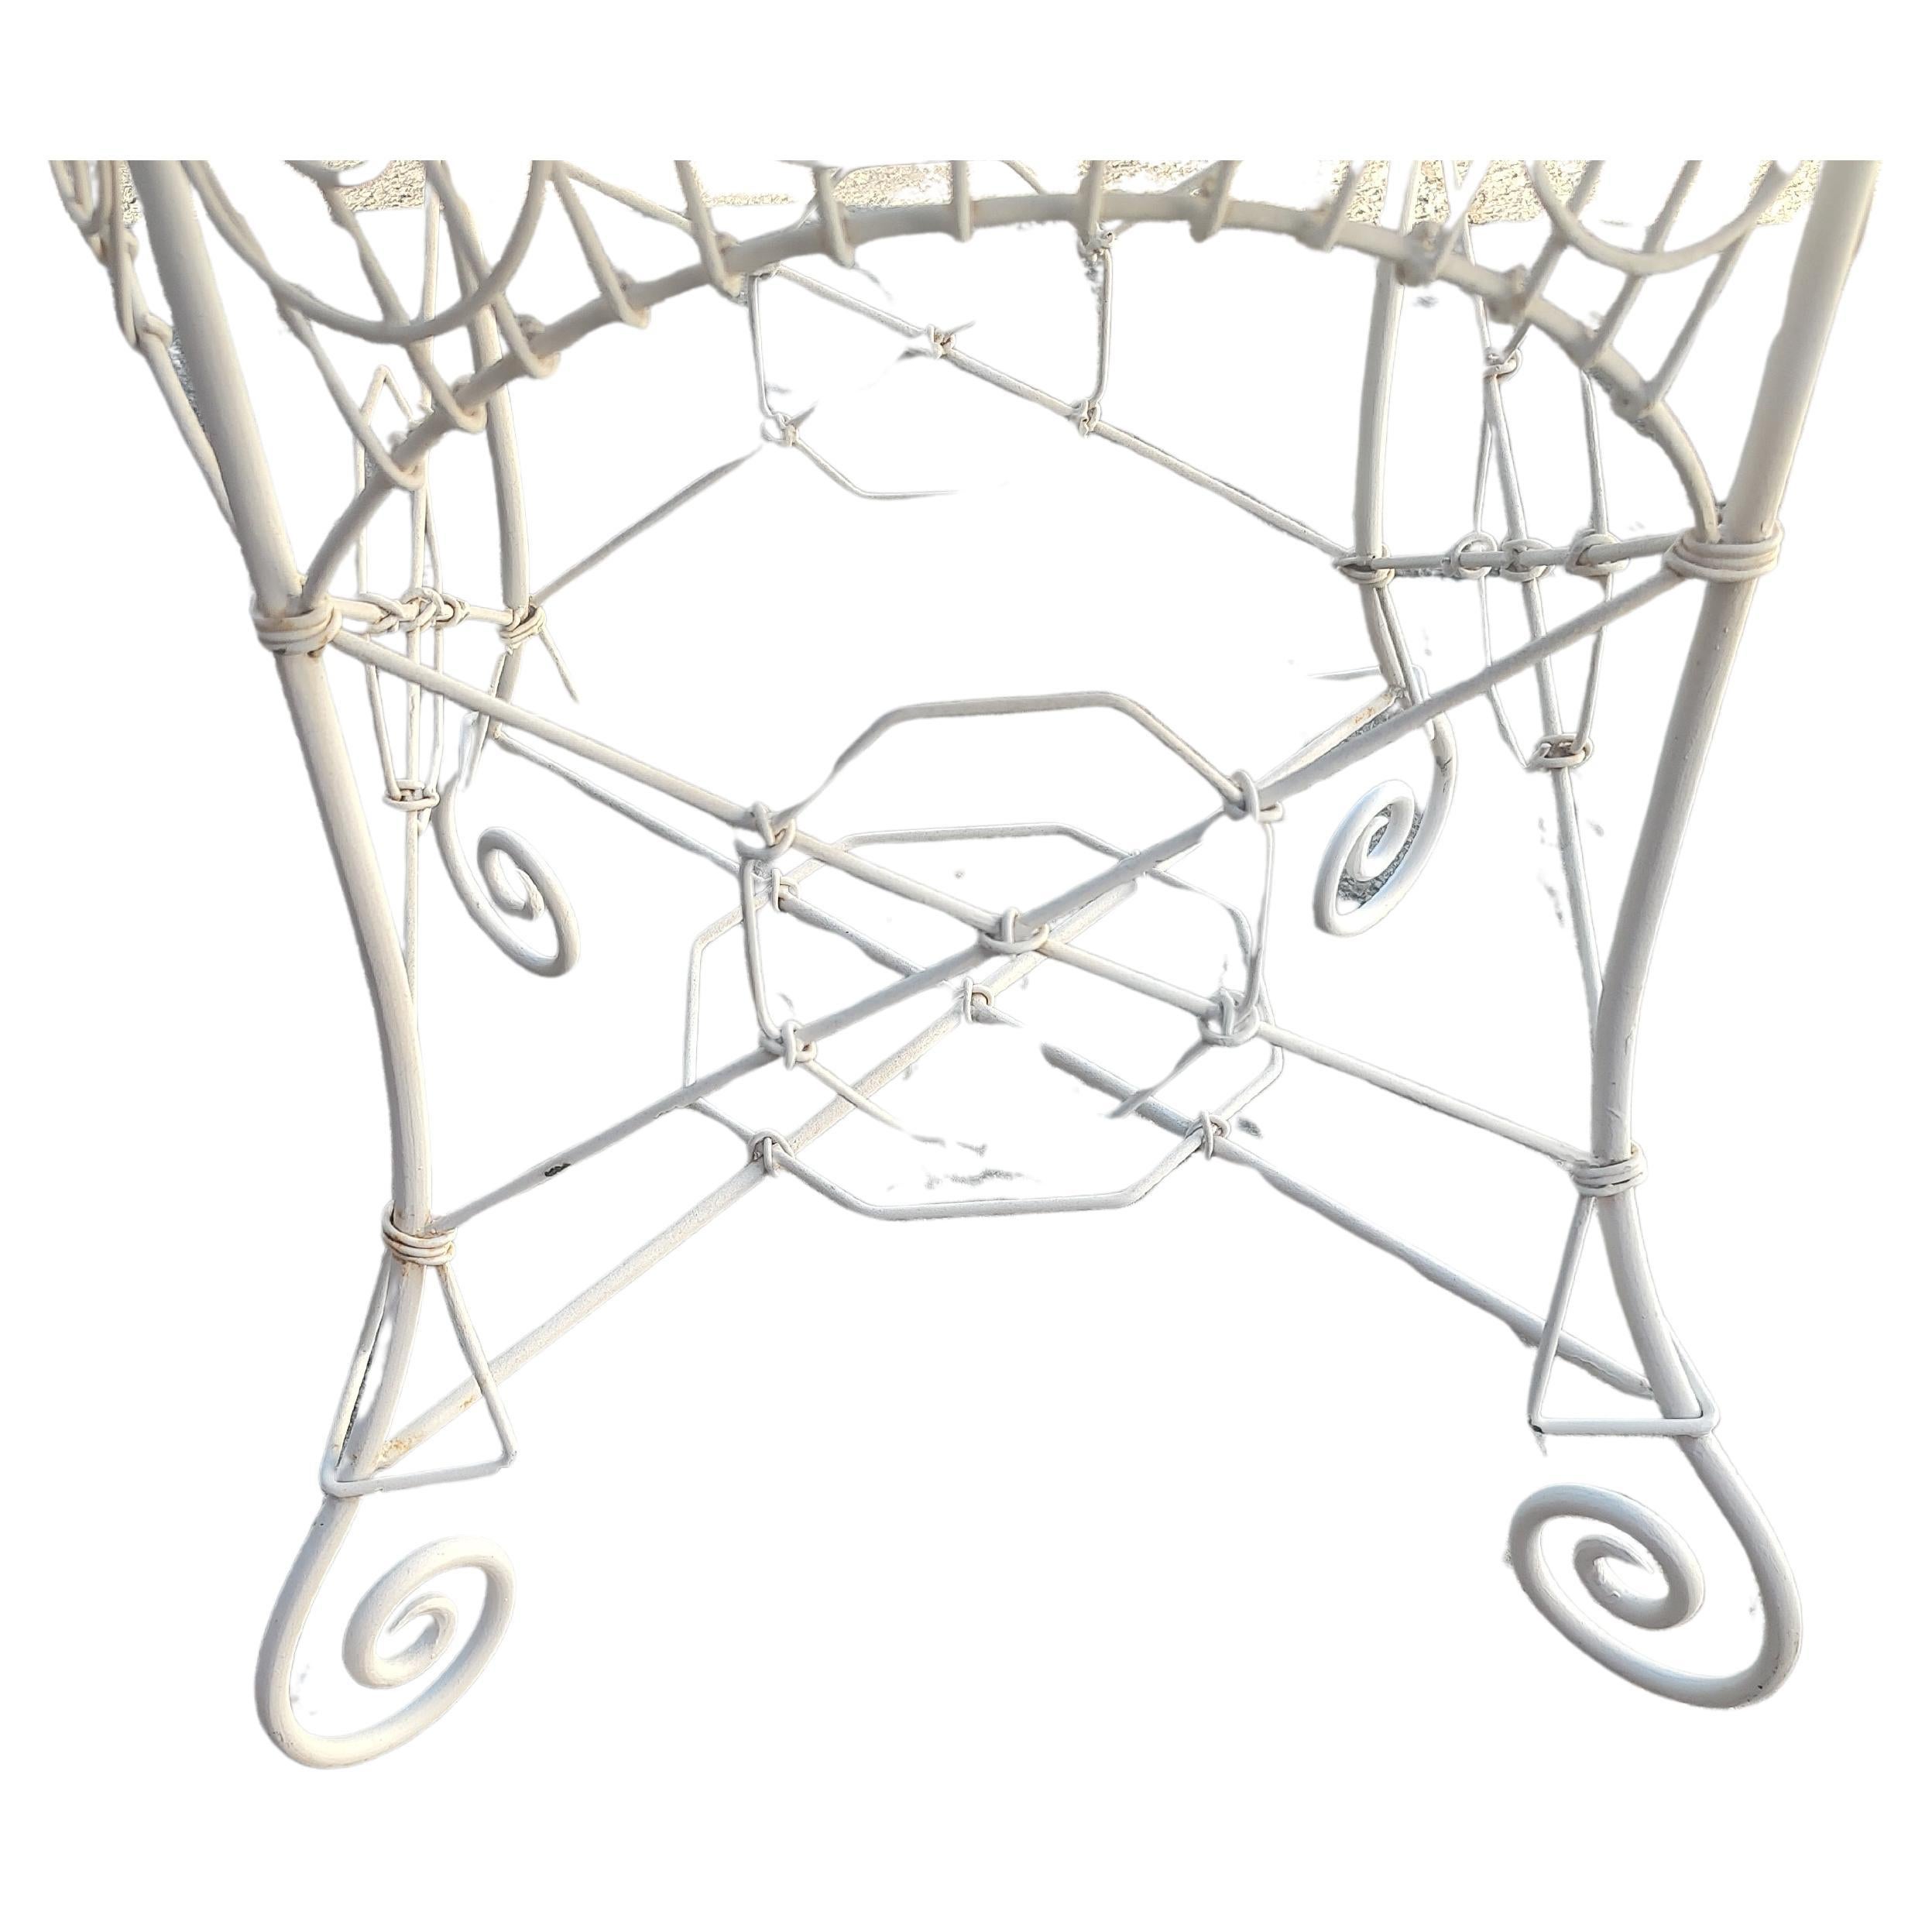 Fantastic iron wire garden & patio dining table with a half inch thick glass top. With the glass top table is 36 diameter by 30 high. Fantastic iron wire design with a rolled edge and fancy scroll work. Evoking the Victorian era with a touch of the